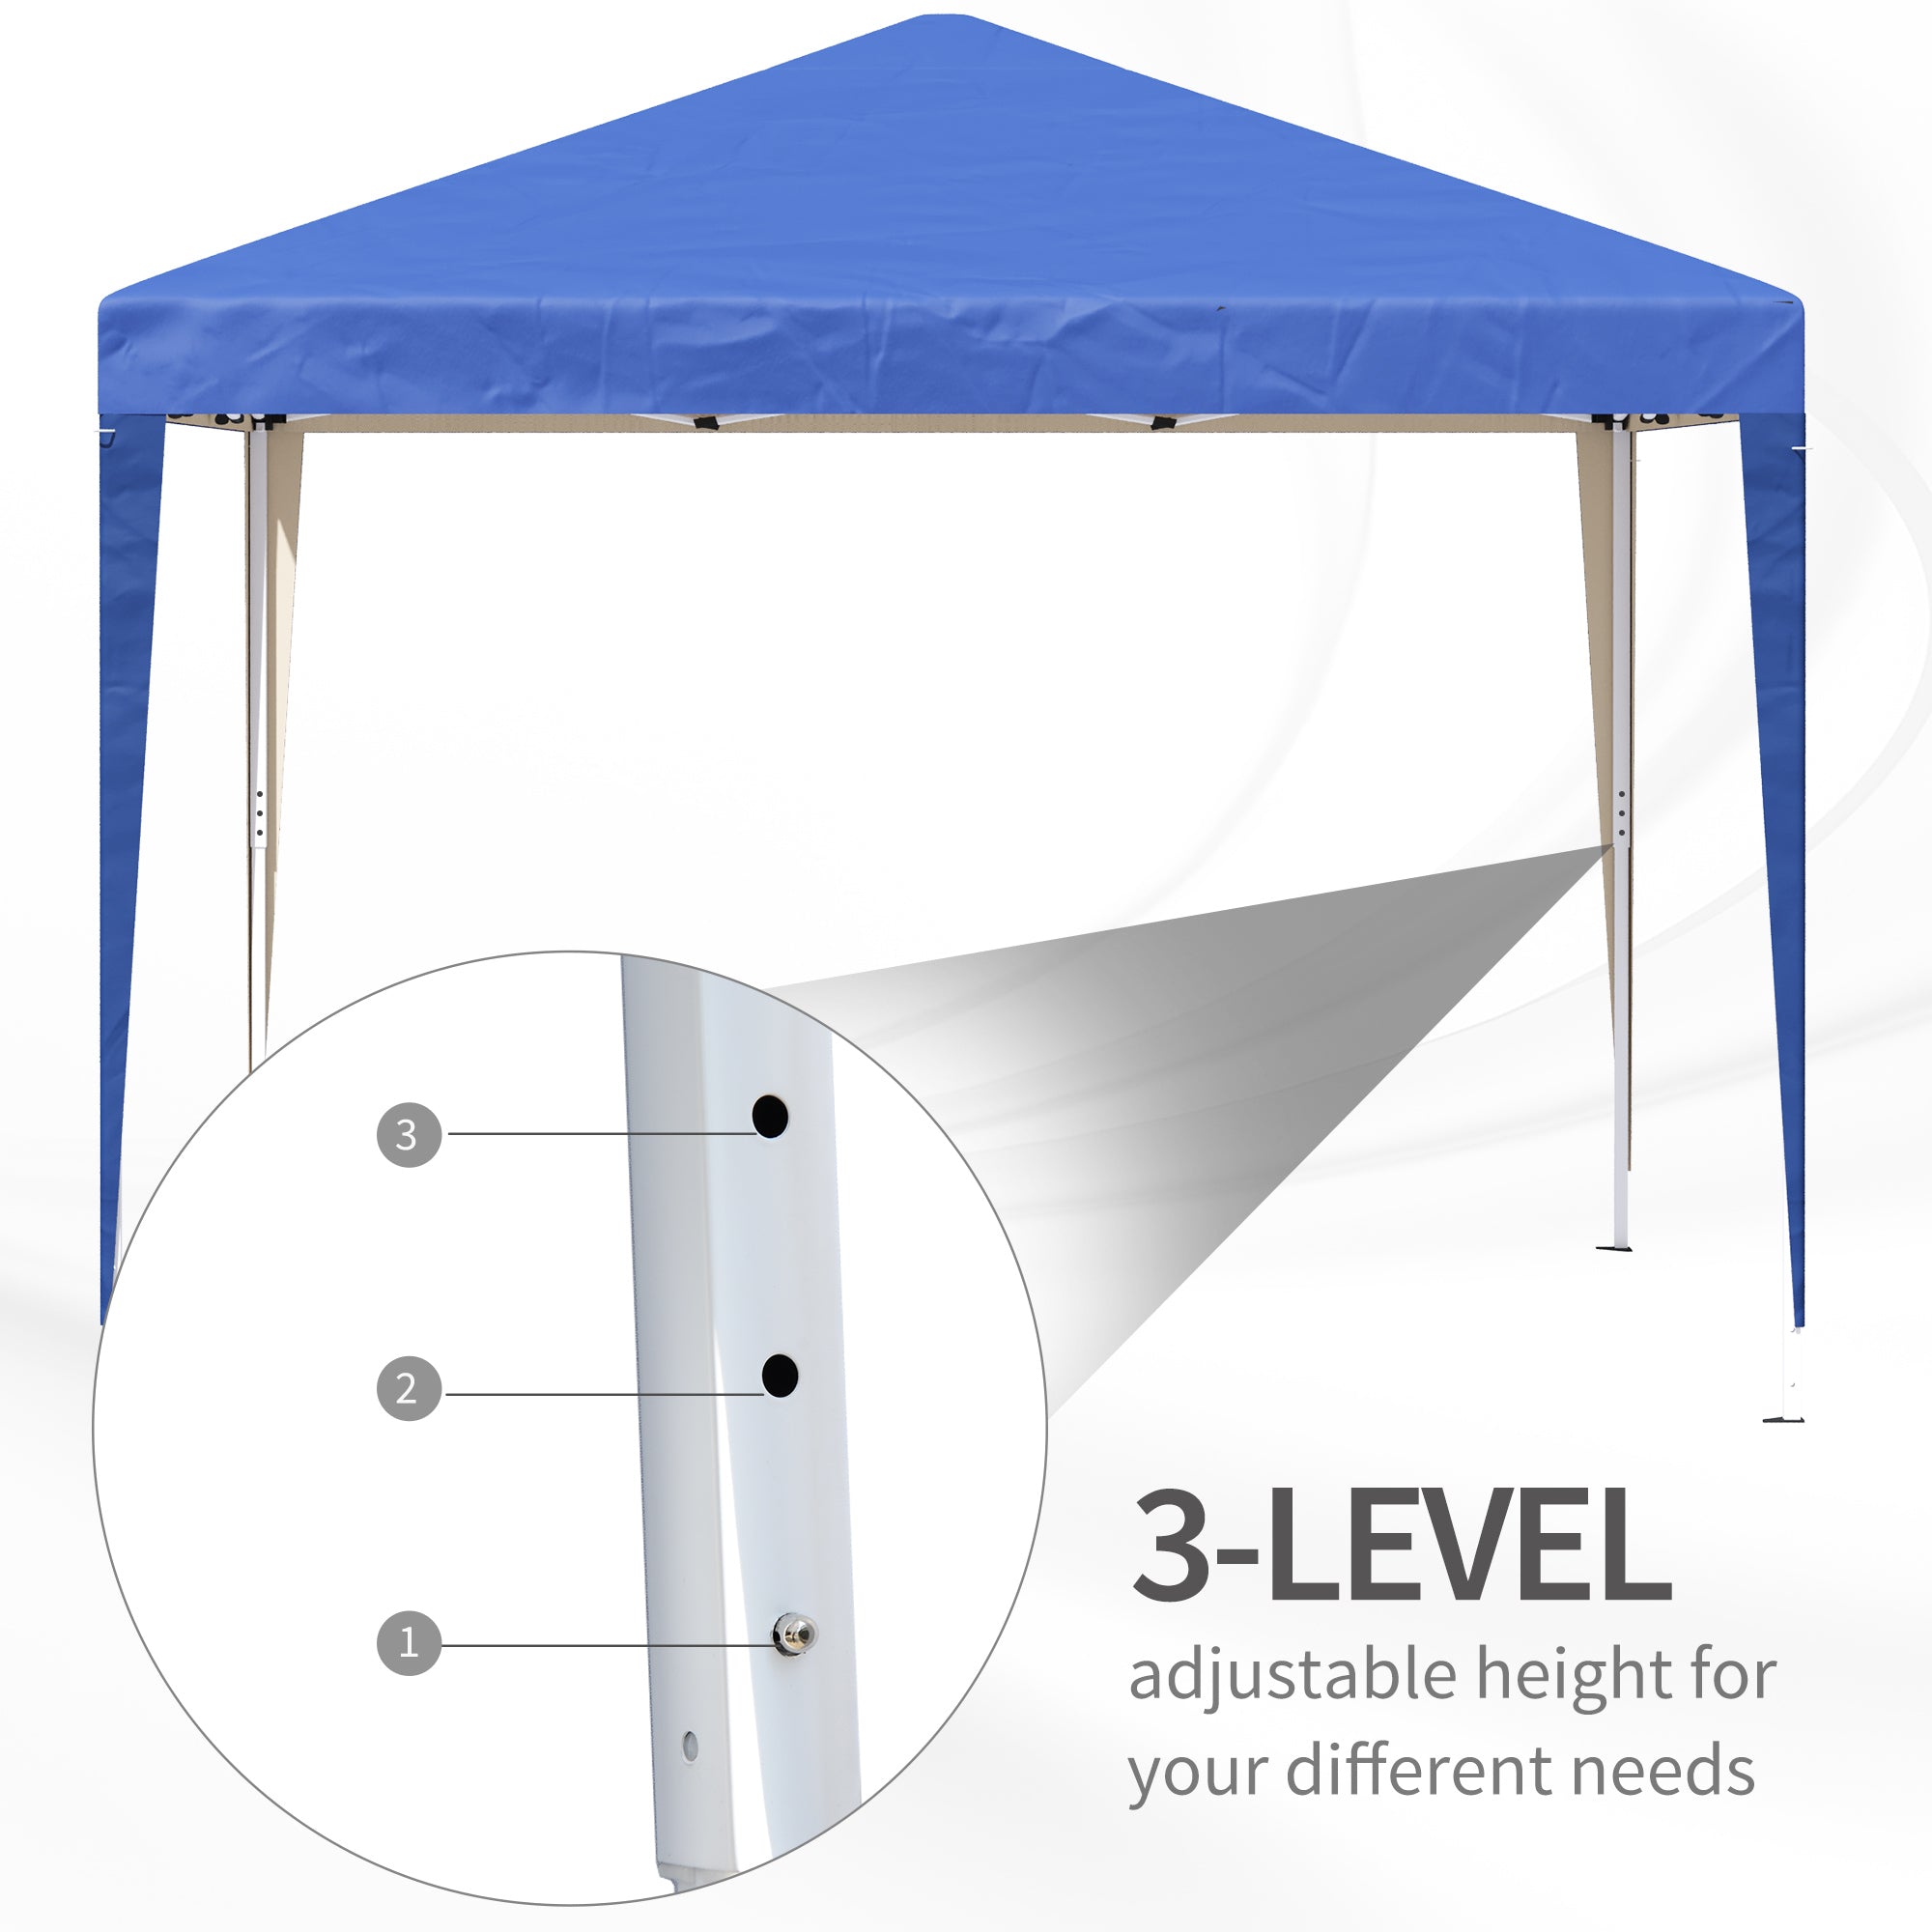 Outsunny 3 x 3M Garden Pop Up Gazebo Marquee Party Tent Wedding Canopy (Blue) + Carrying Bag - Inspirely